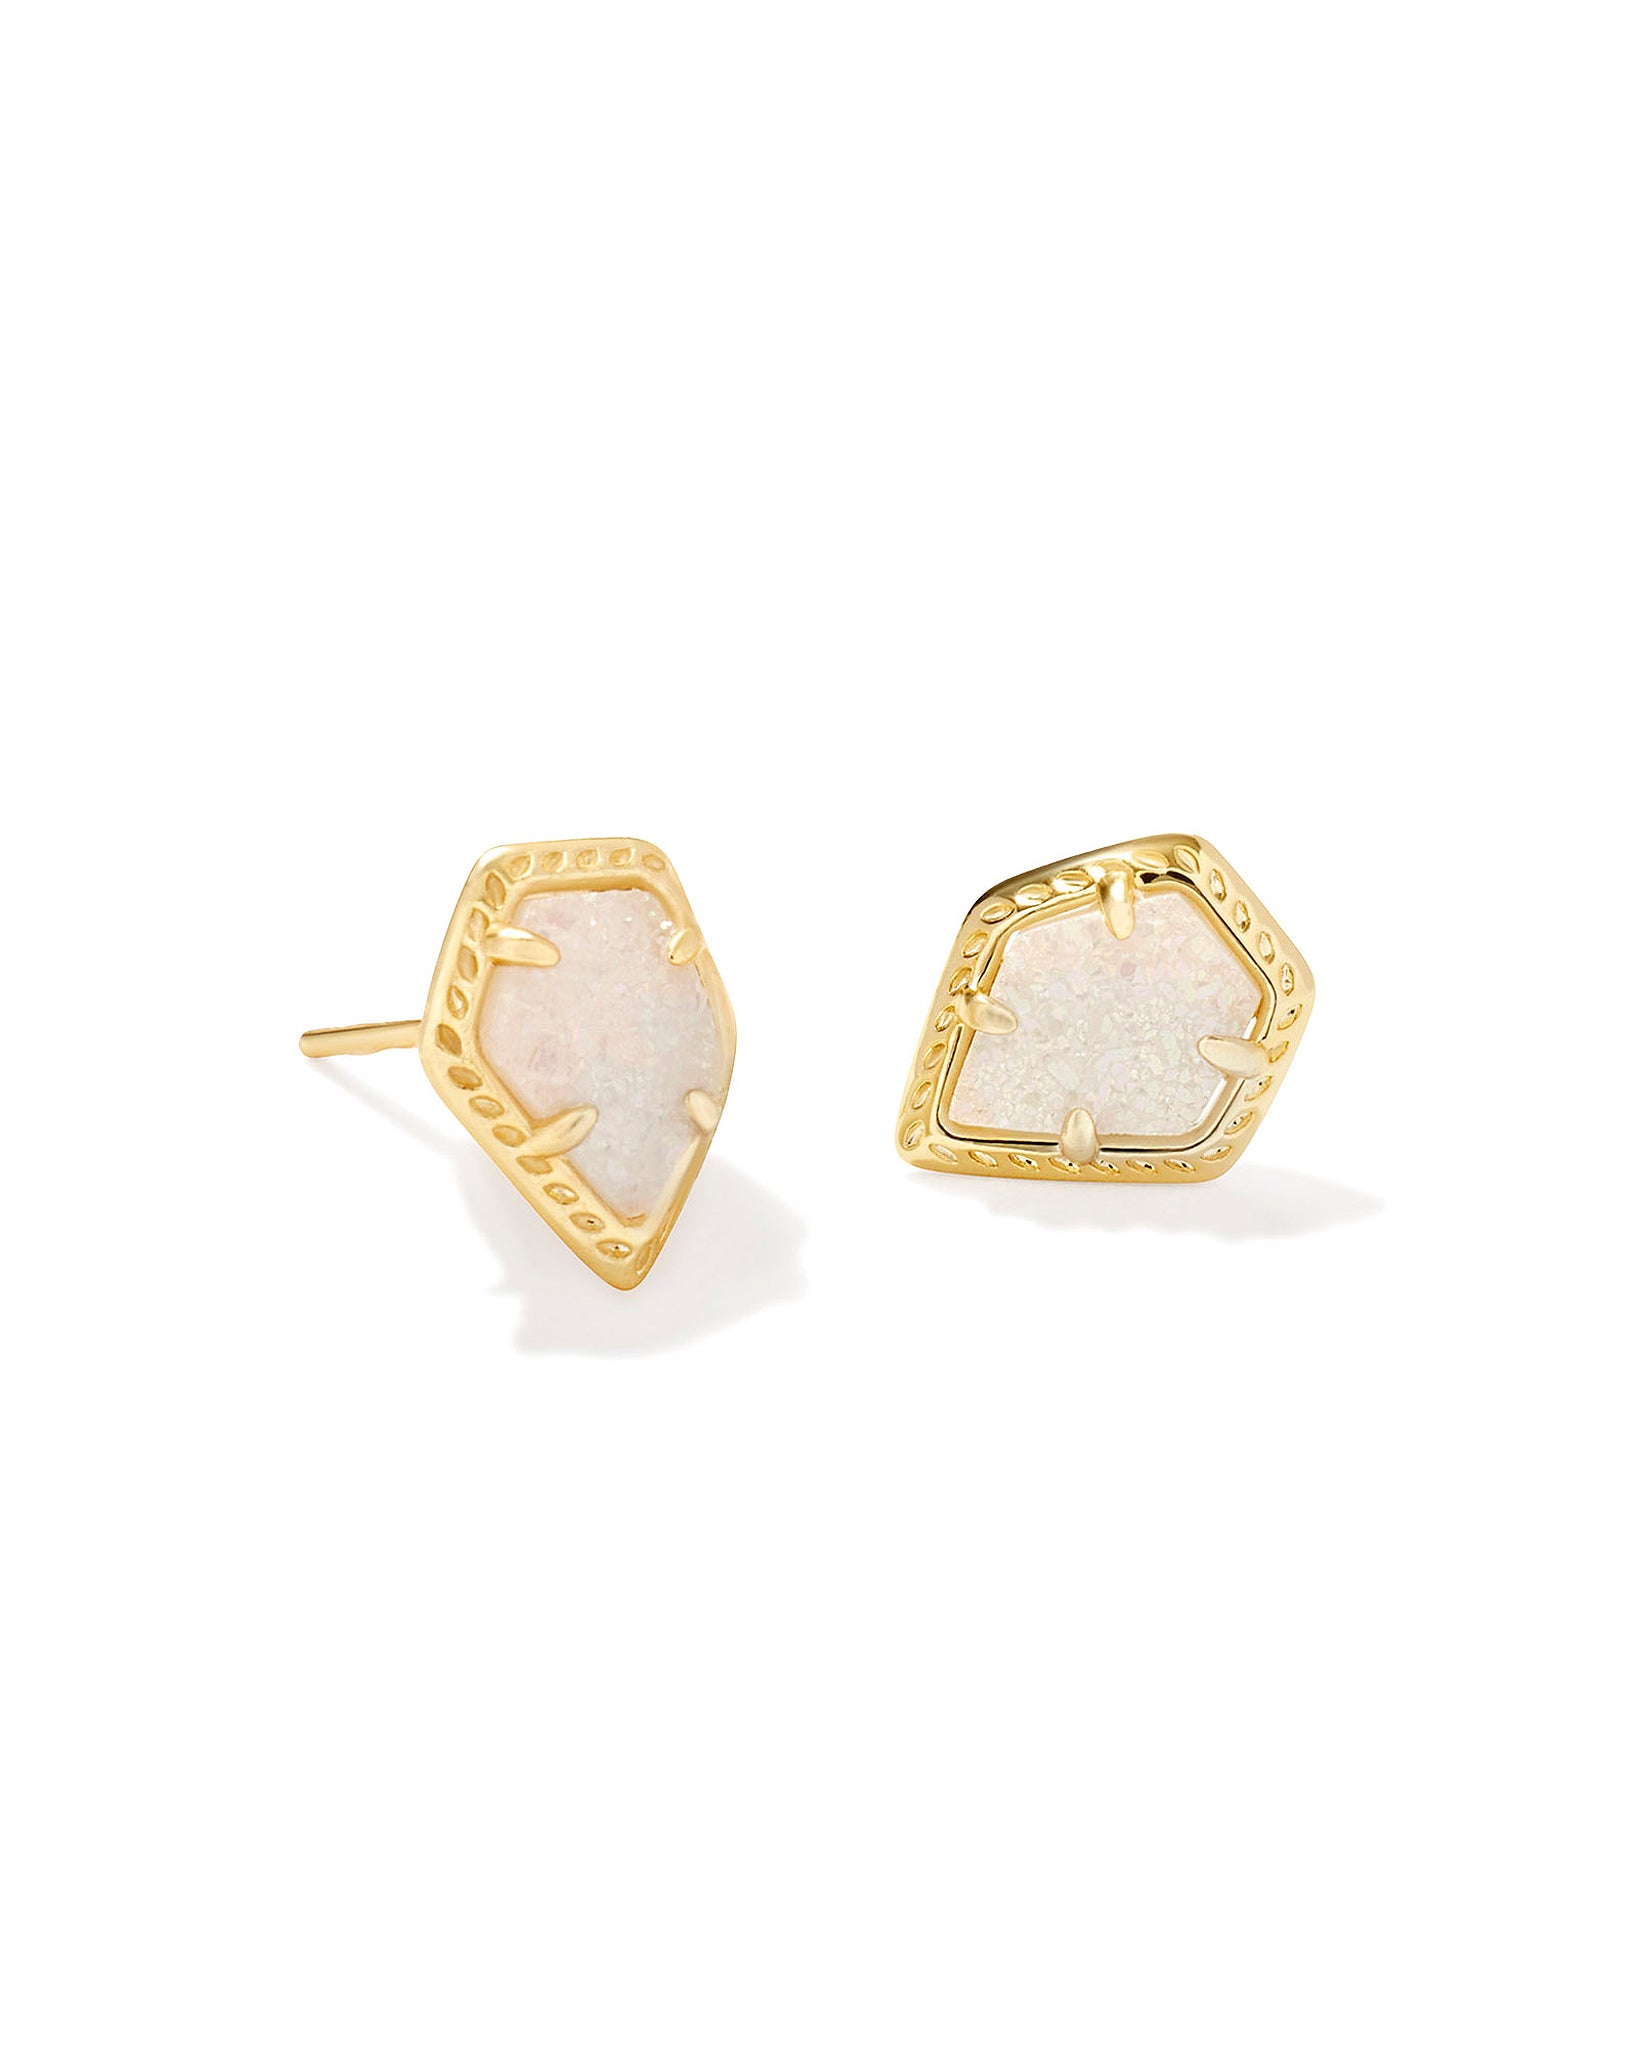 Kendra Scott Tessa Framed Stud Earrings in Iridescent Drusy and Gold Plated